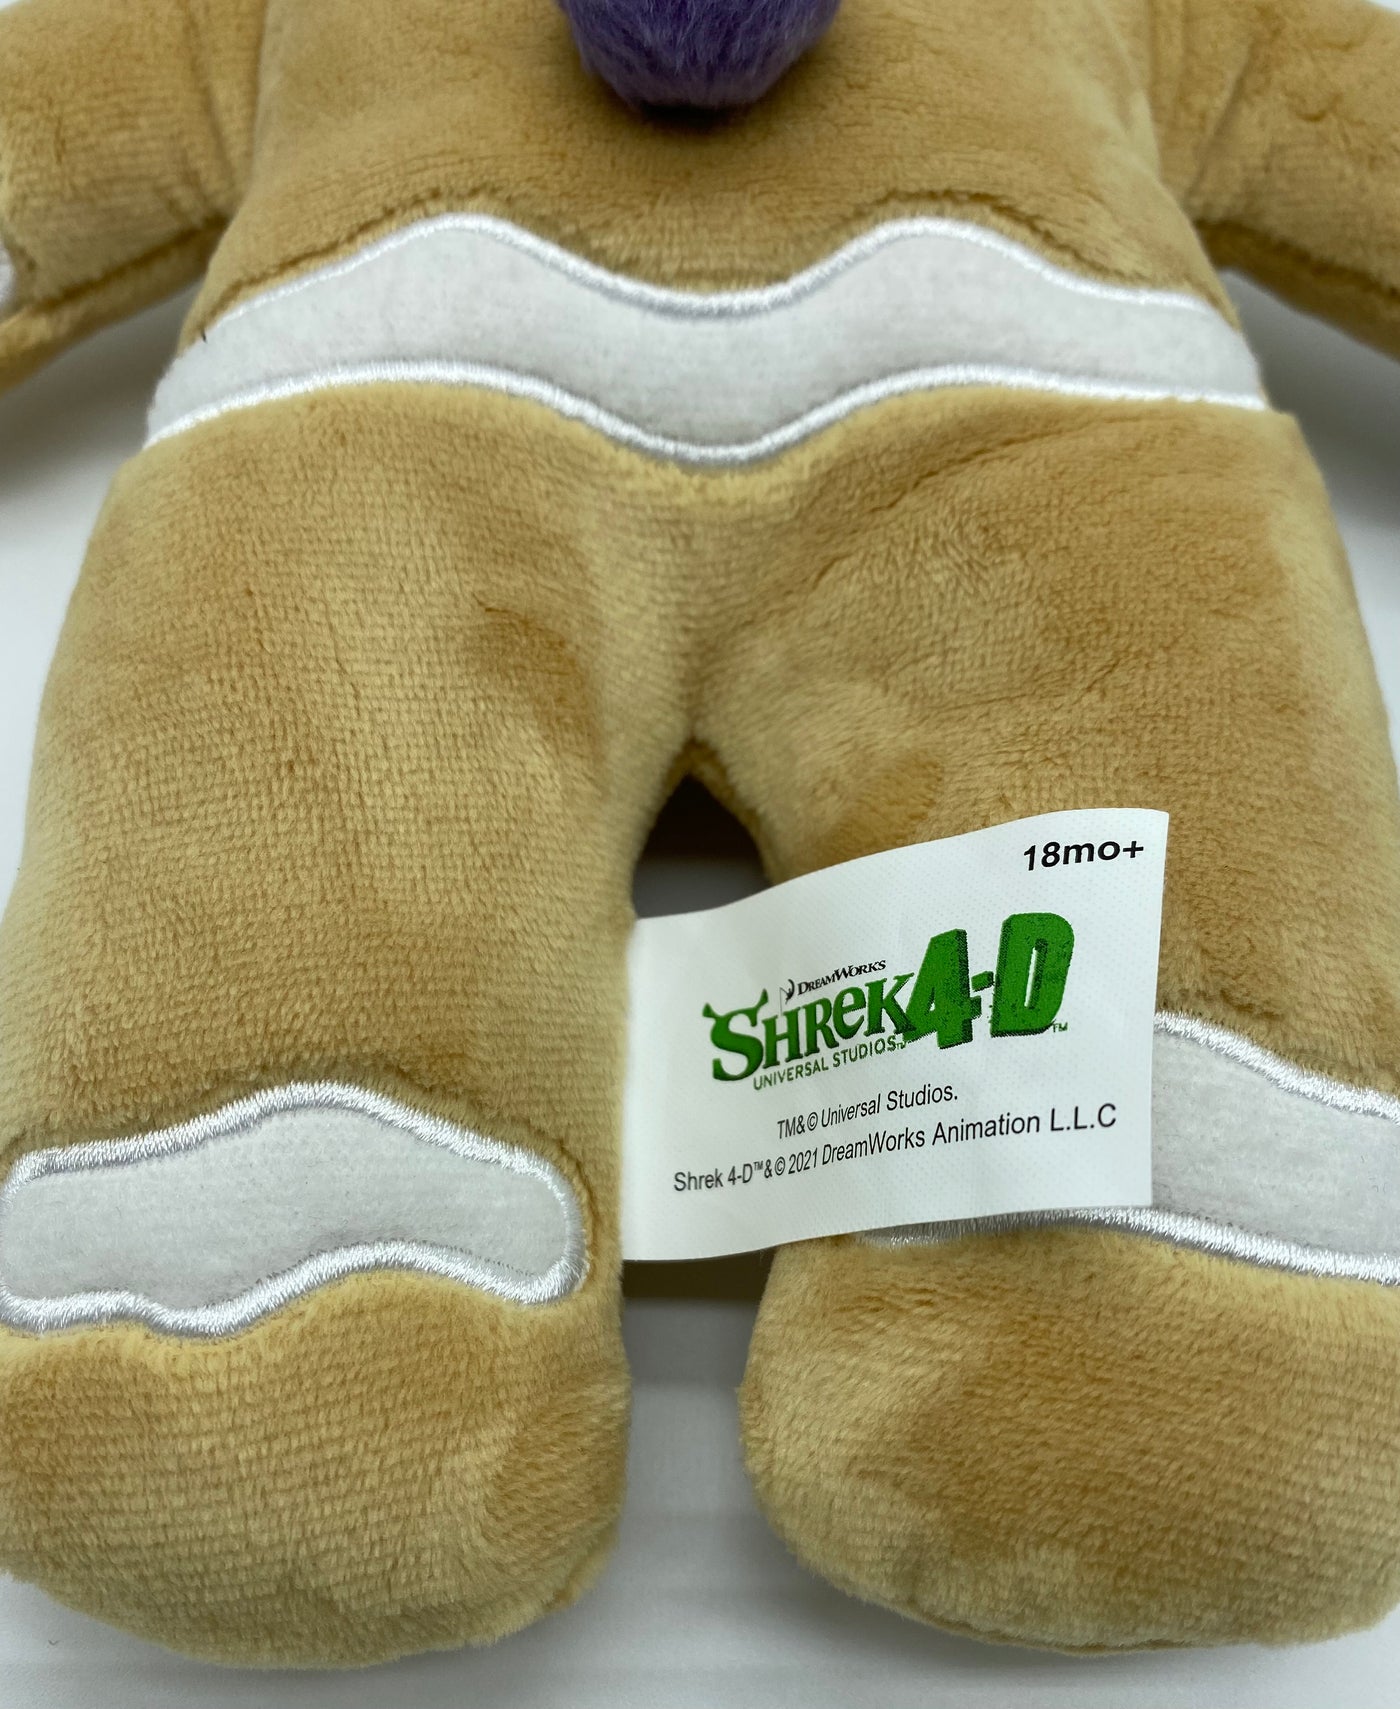 Universal Studios Shrek Gingerbread Plush Toy New With Tags